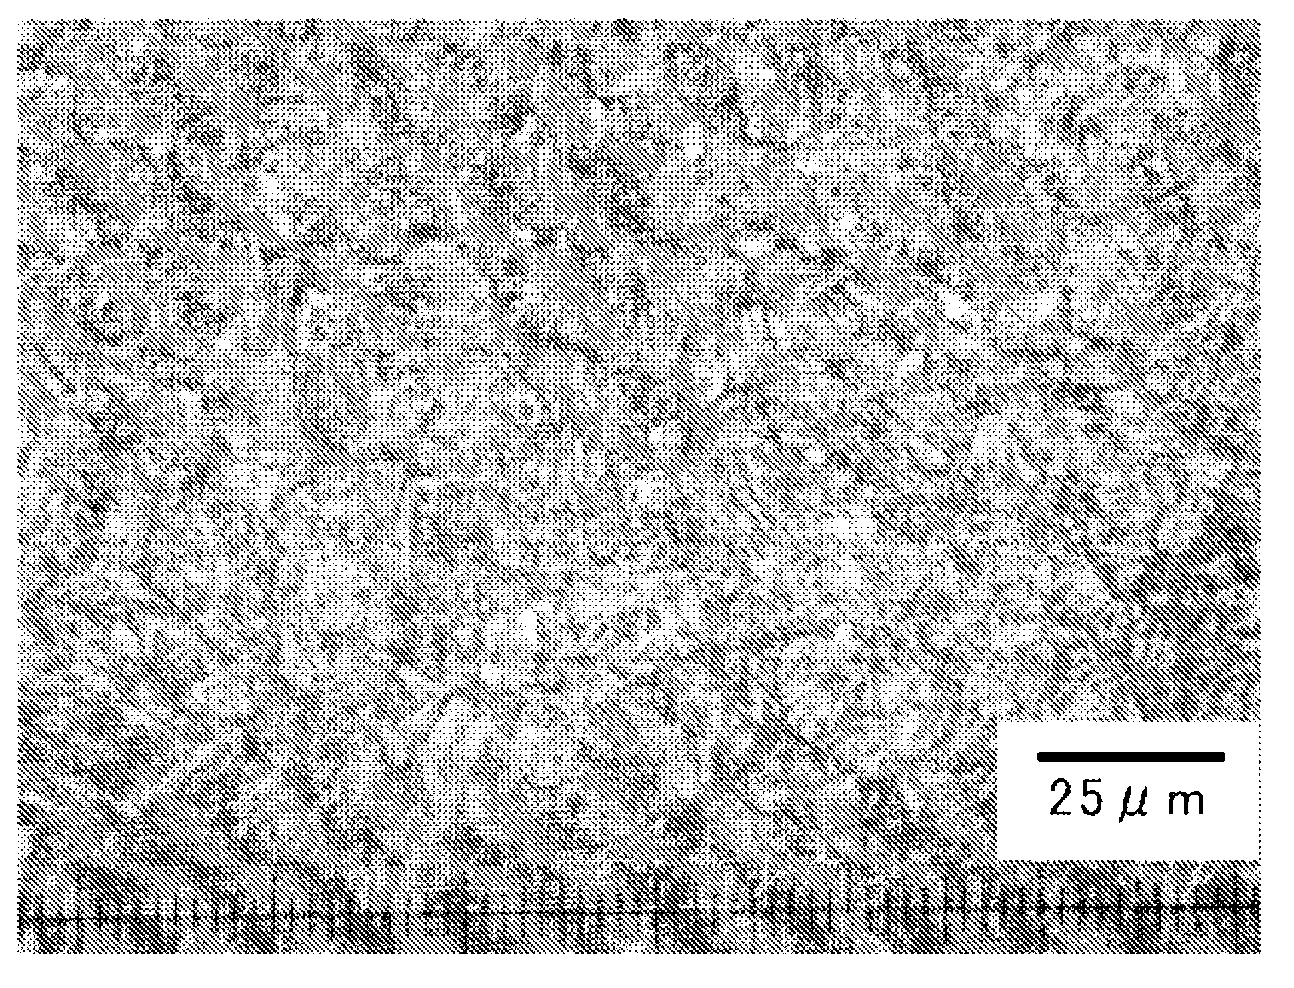 Method for quenching mold